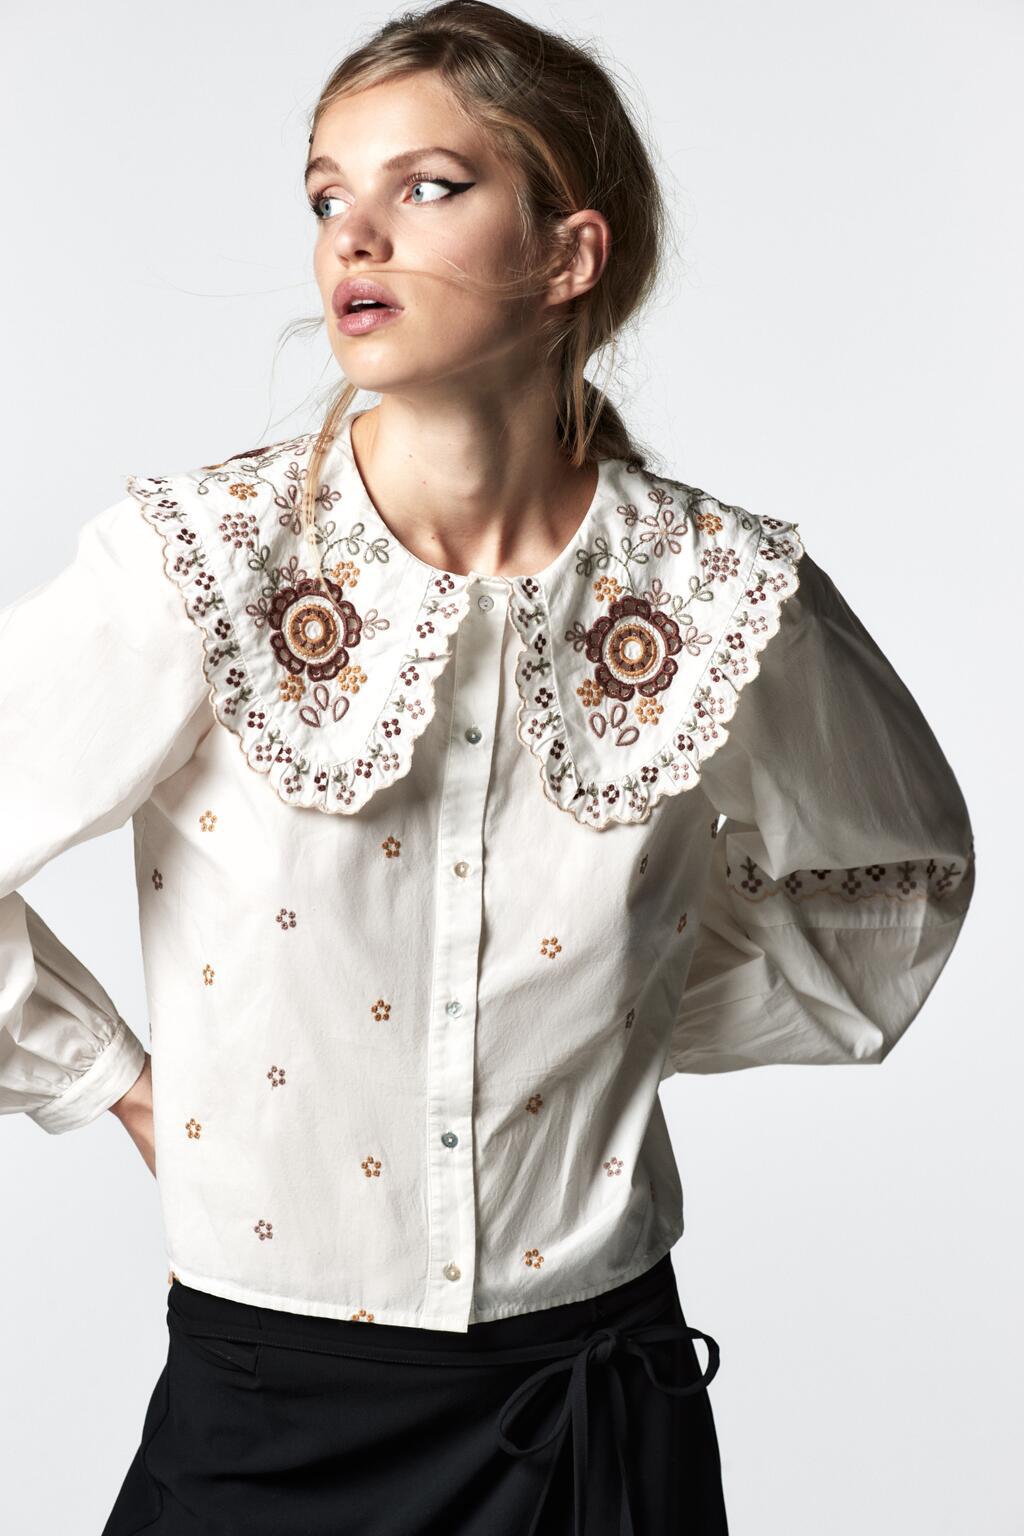 Chicdear Spring Women Flower Embroidery Peter Pan Collar White Shirt Female Long Sleeve Blouse Lady Loose Tops Blusas